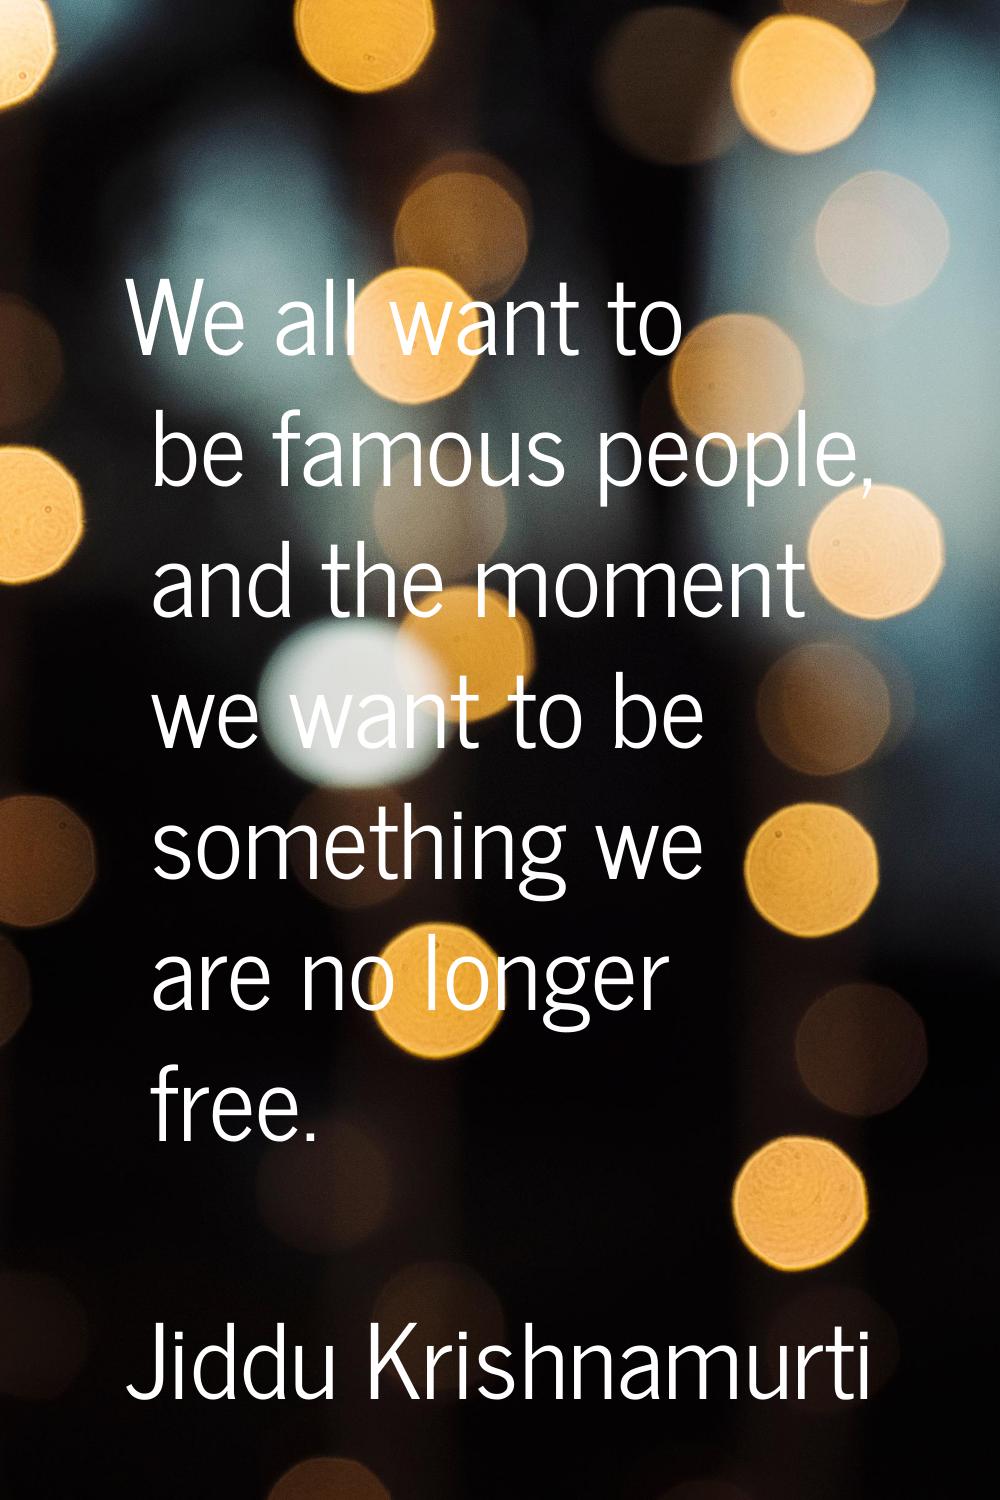 We all want to be famous people, and the moment we want to be something we are no longer free.